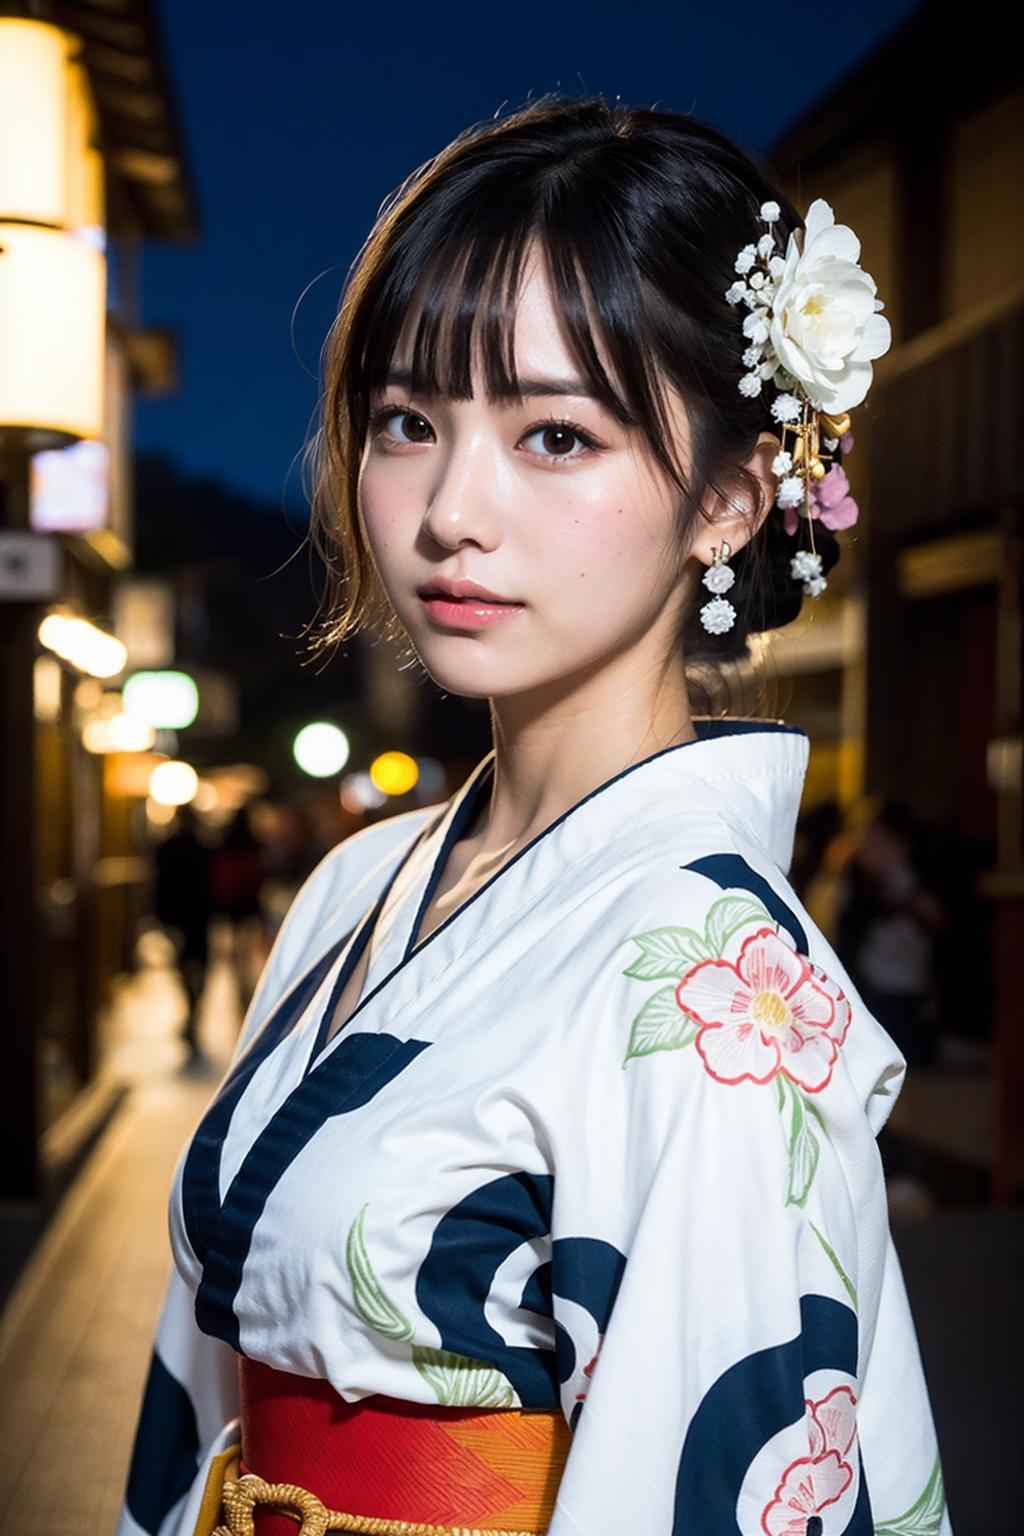 A pretty Japanese woman wearing a white dress with flowers on her head and earrings.